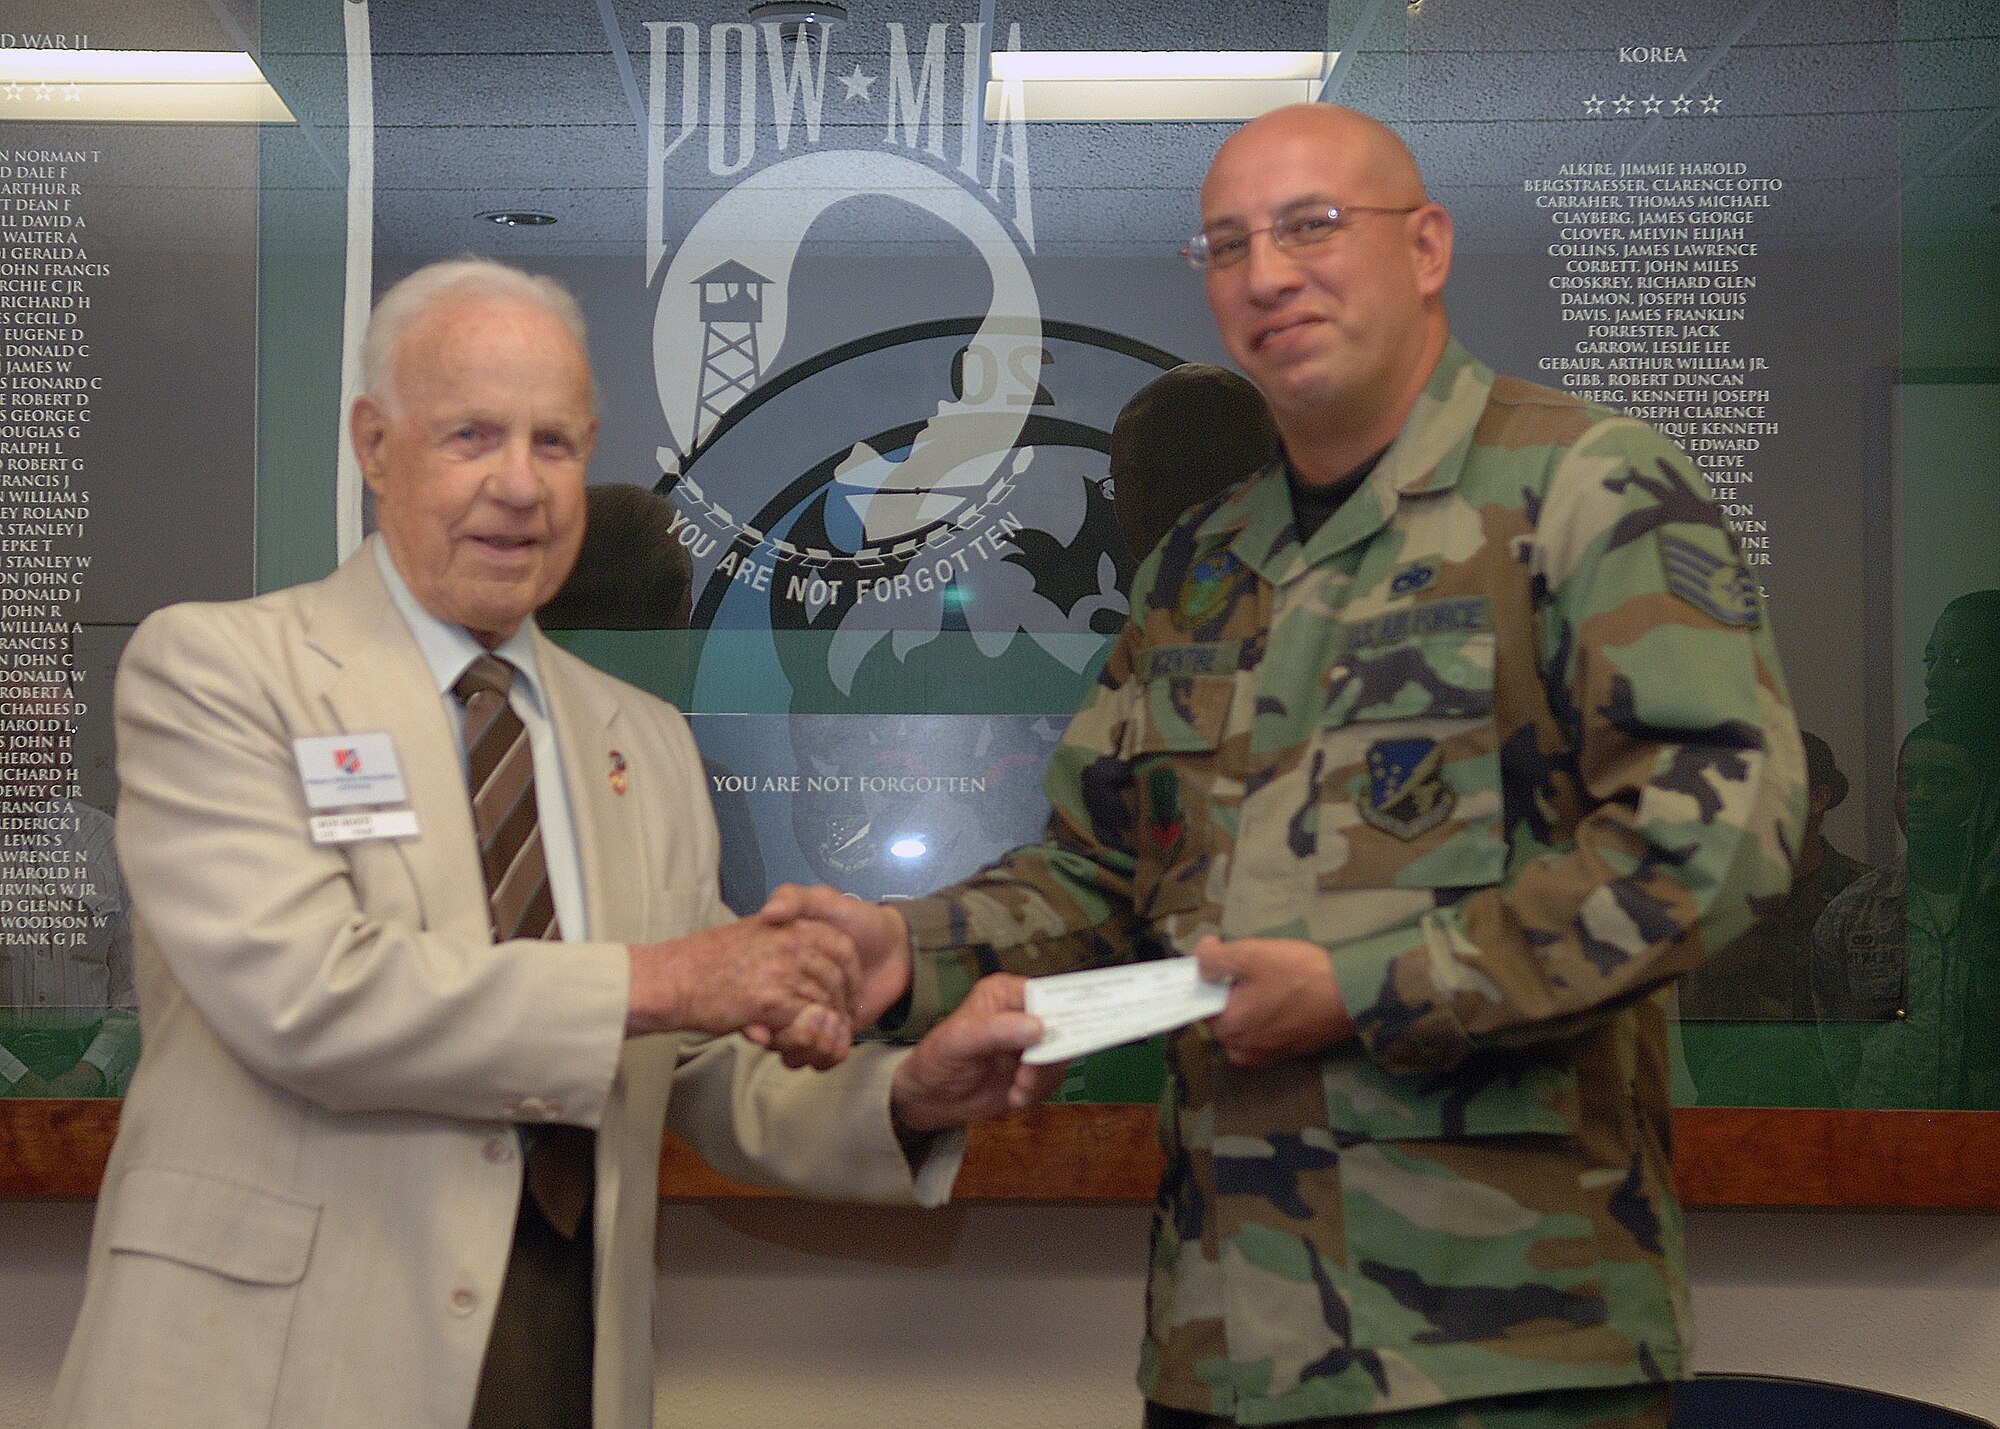 Staff Sgt. Larry McEntire, 49th Maintenance Squadron and president of the Steel Talon Booster Club, receives a $500 check April 24 from the Military Officers Association of America. The check is a part of an annual contribution to the Steel Talons Honor Guard at Holloman Air Force base, N.M. The booster club will use this check to cover operational support expenses throughout the year. (U.S. Air Force photo/Airman 1st Class Veronica Stamps)